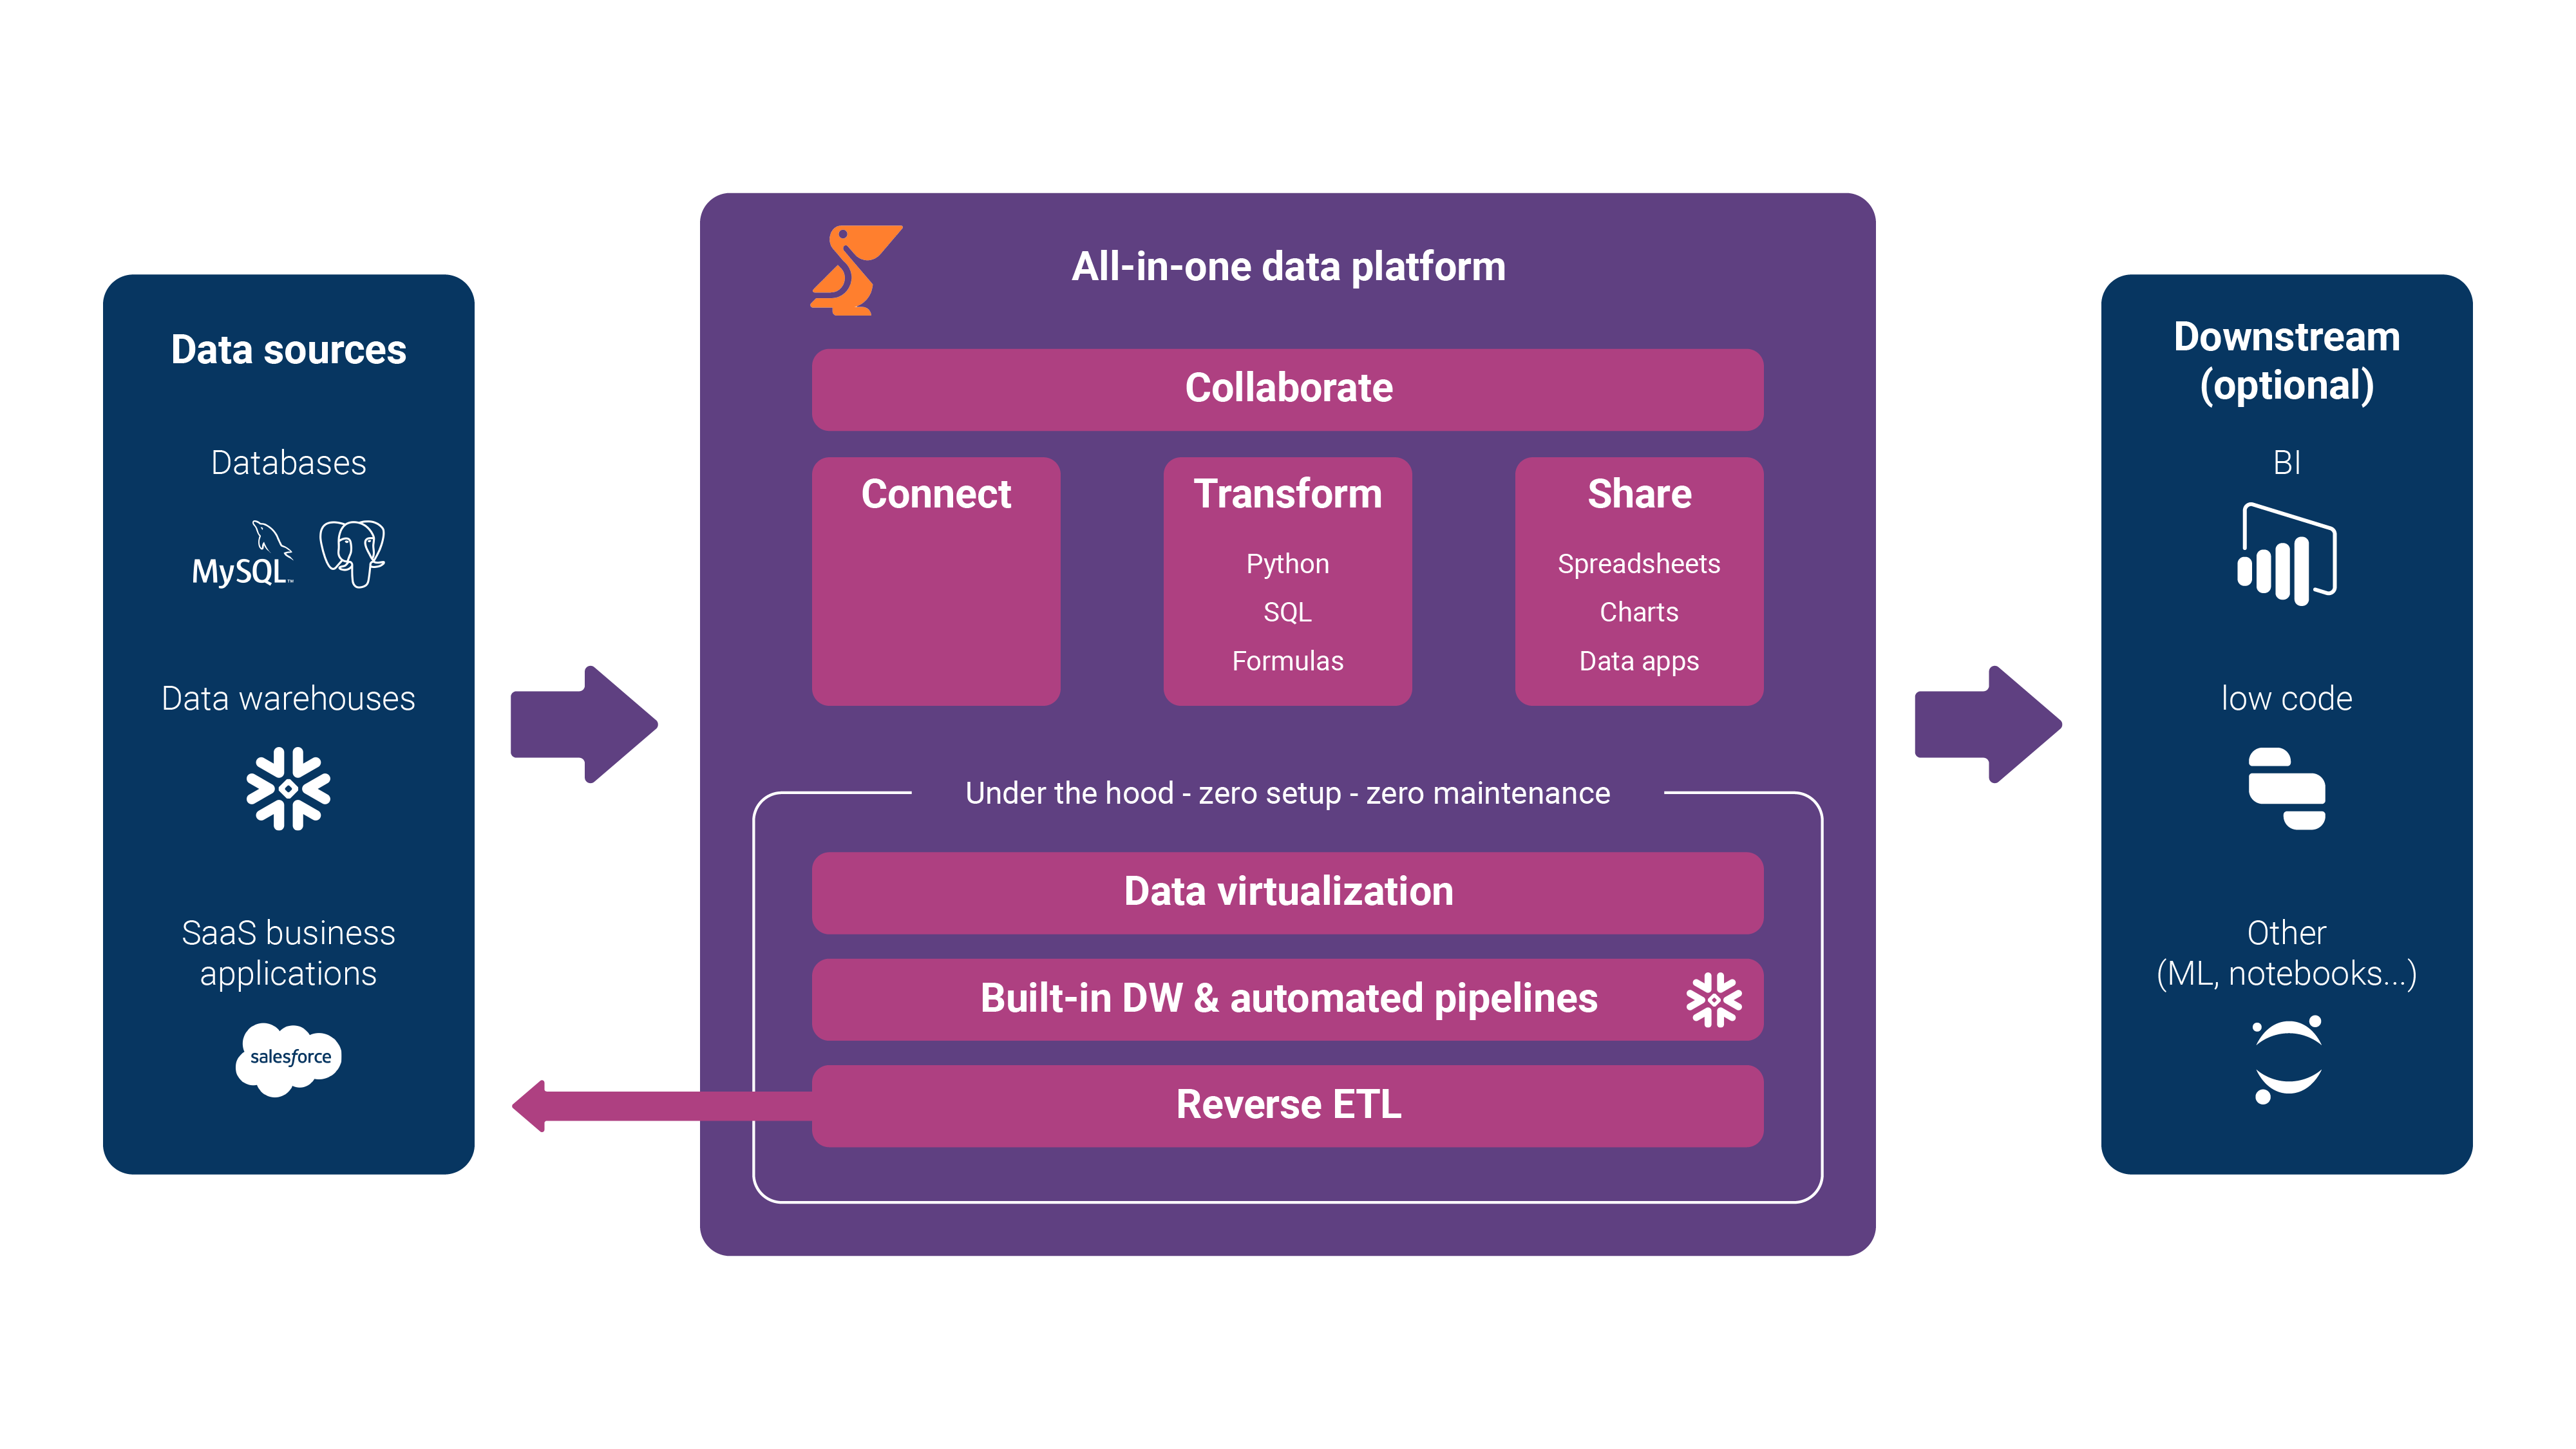 Peliqan is an all-in-one data platform that combines ETL (ELT), a built-in data warehouse, Data virtualization, Reverse ETL and supports any BI tool